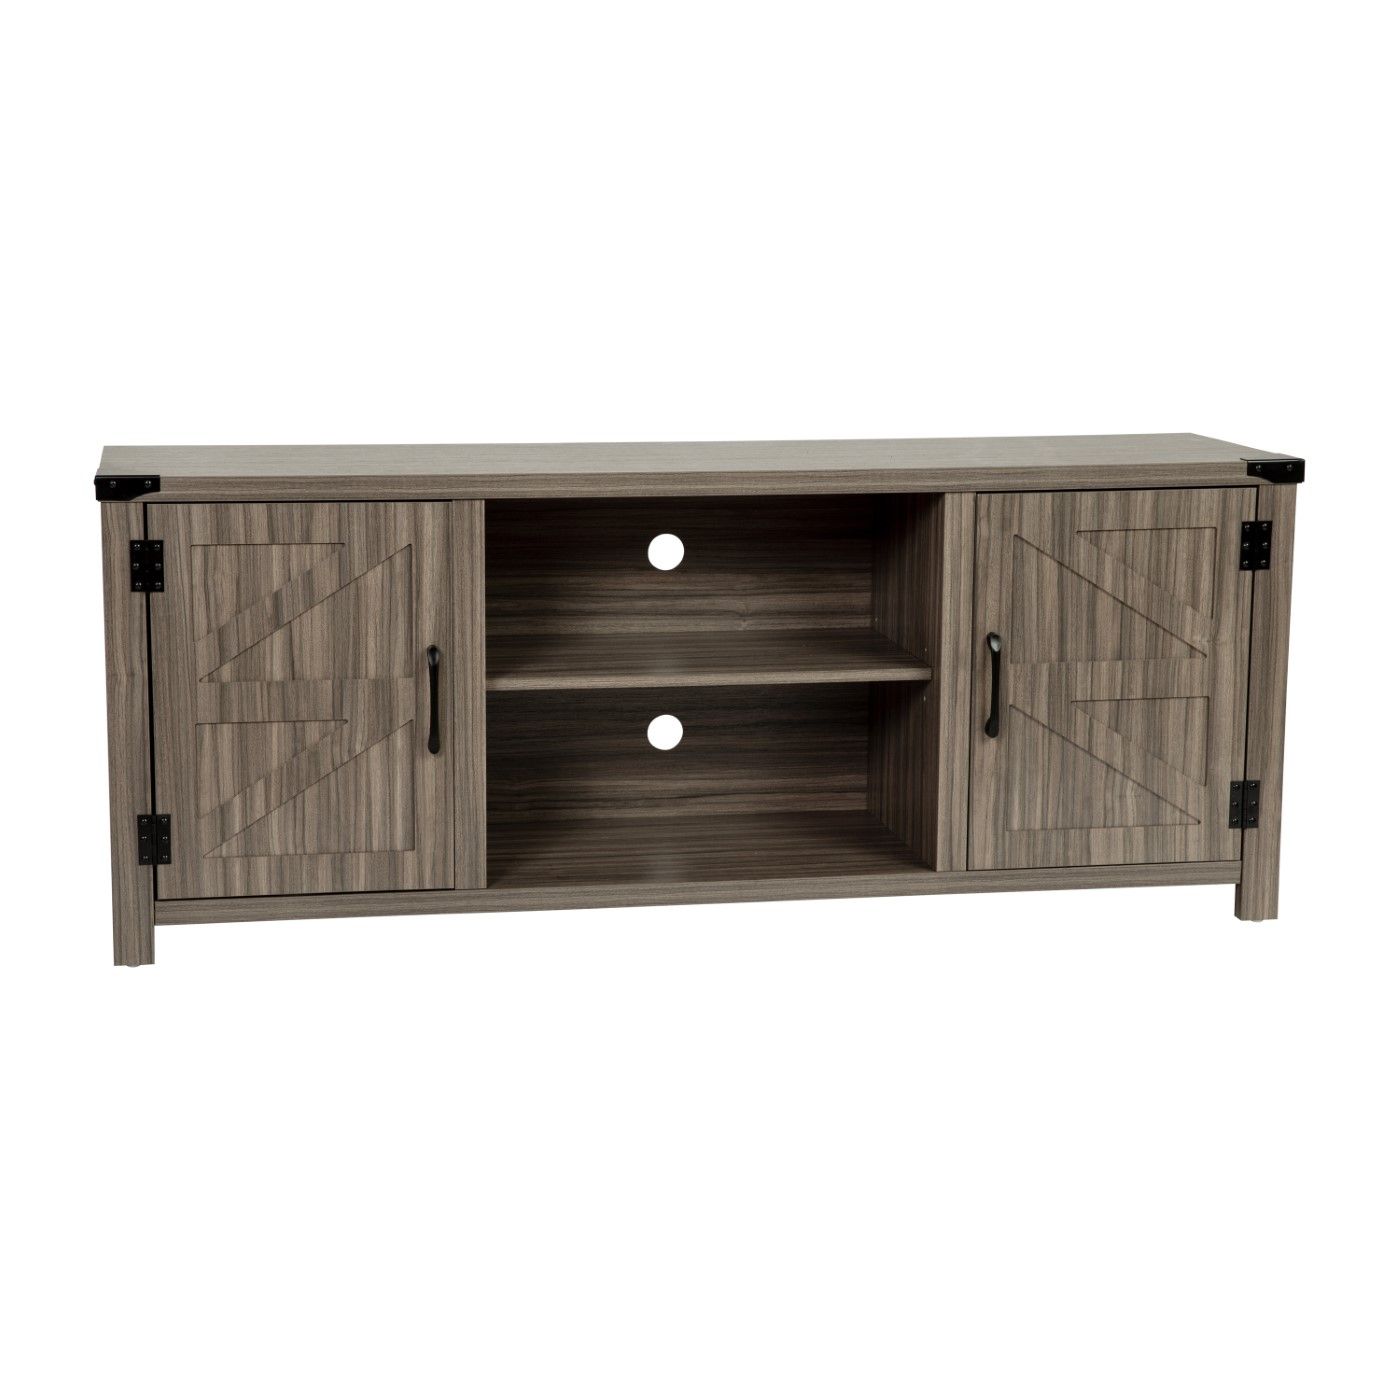 Ayrith Modern Farmhouse Barn Door Tv Stand – Gray Wash Oak For Tv's Up To  65 Inches – 59" Entertainment Center With Adjustable Shelf With Regard To Modern Farmhouse Barn Tv Stands (Photo 10 of 15)